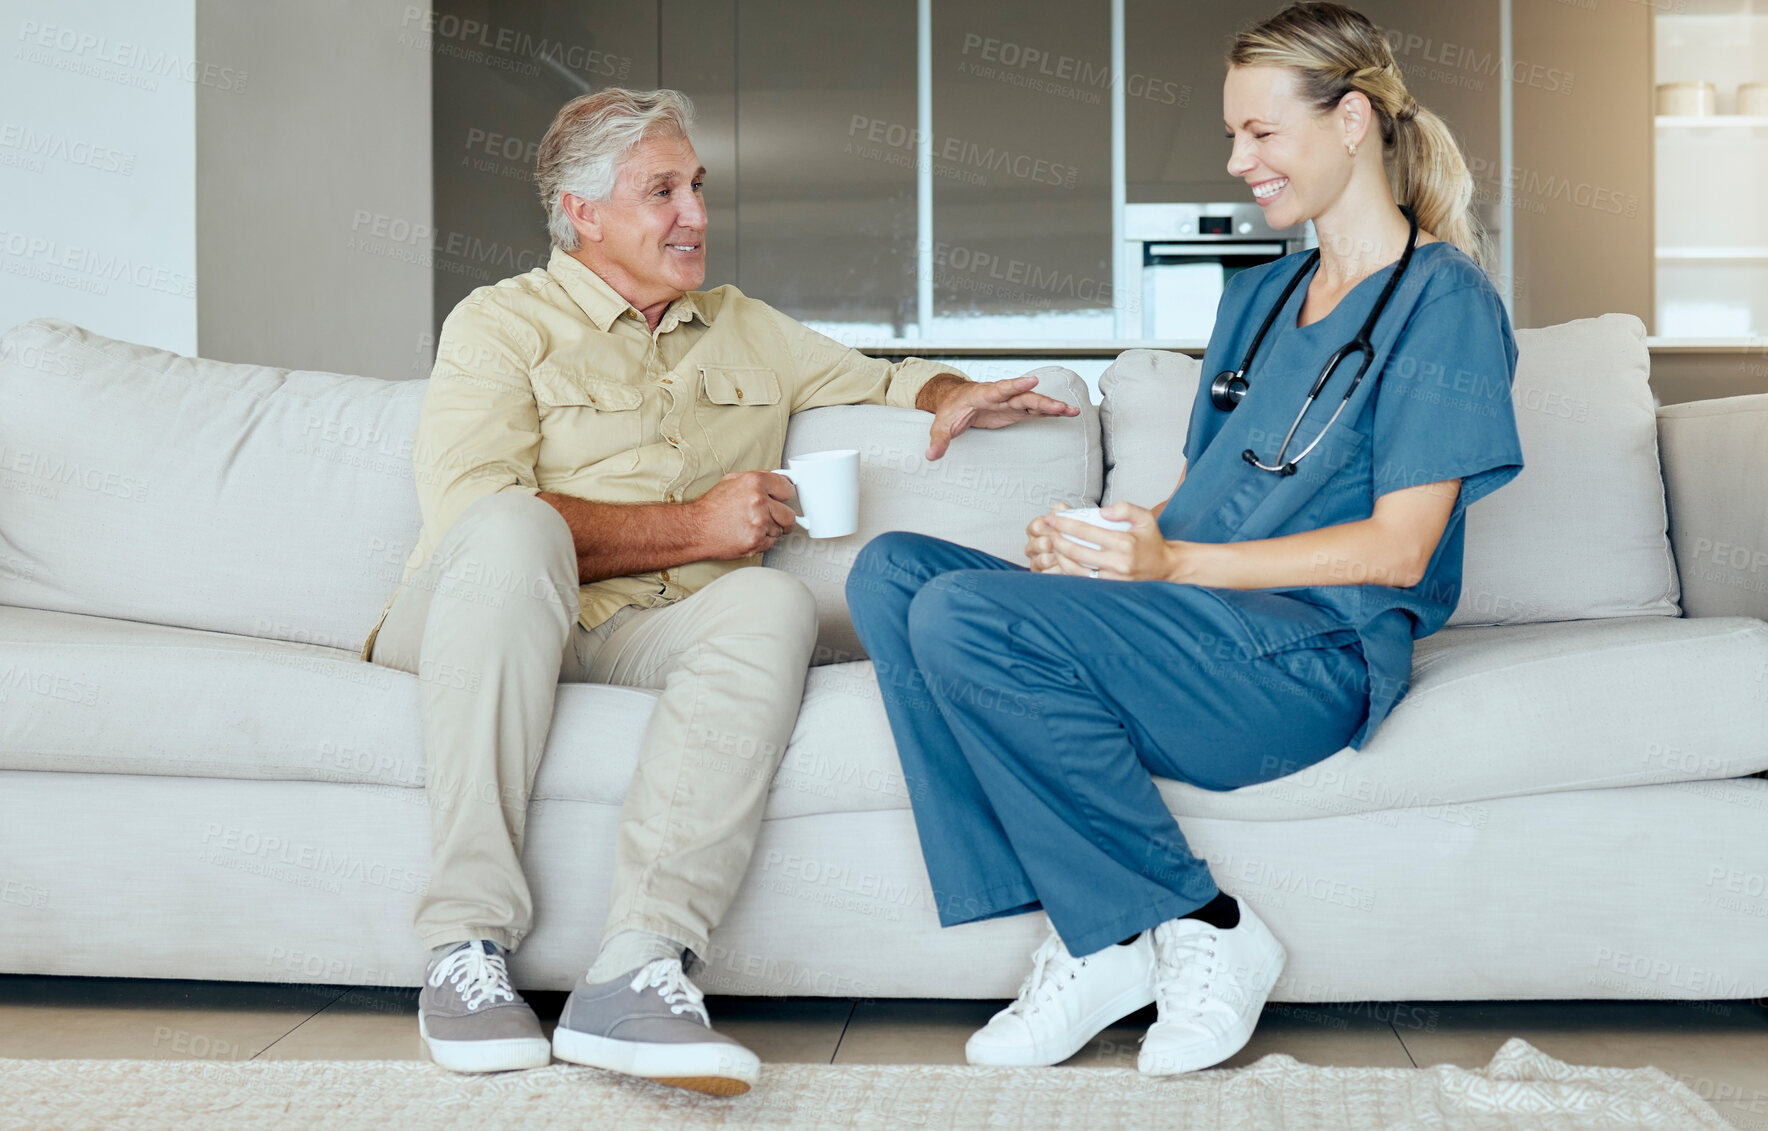 Buy stock photo A happy smiling man and woman showing the bond between patient and doctor during a checkup at home. A doctor showing support for her patient while sitting on a sofa chatting and drinking coffee